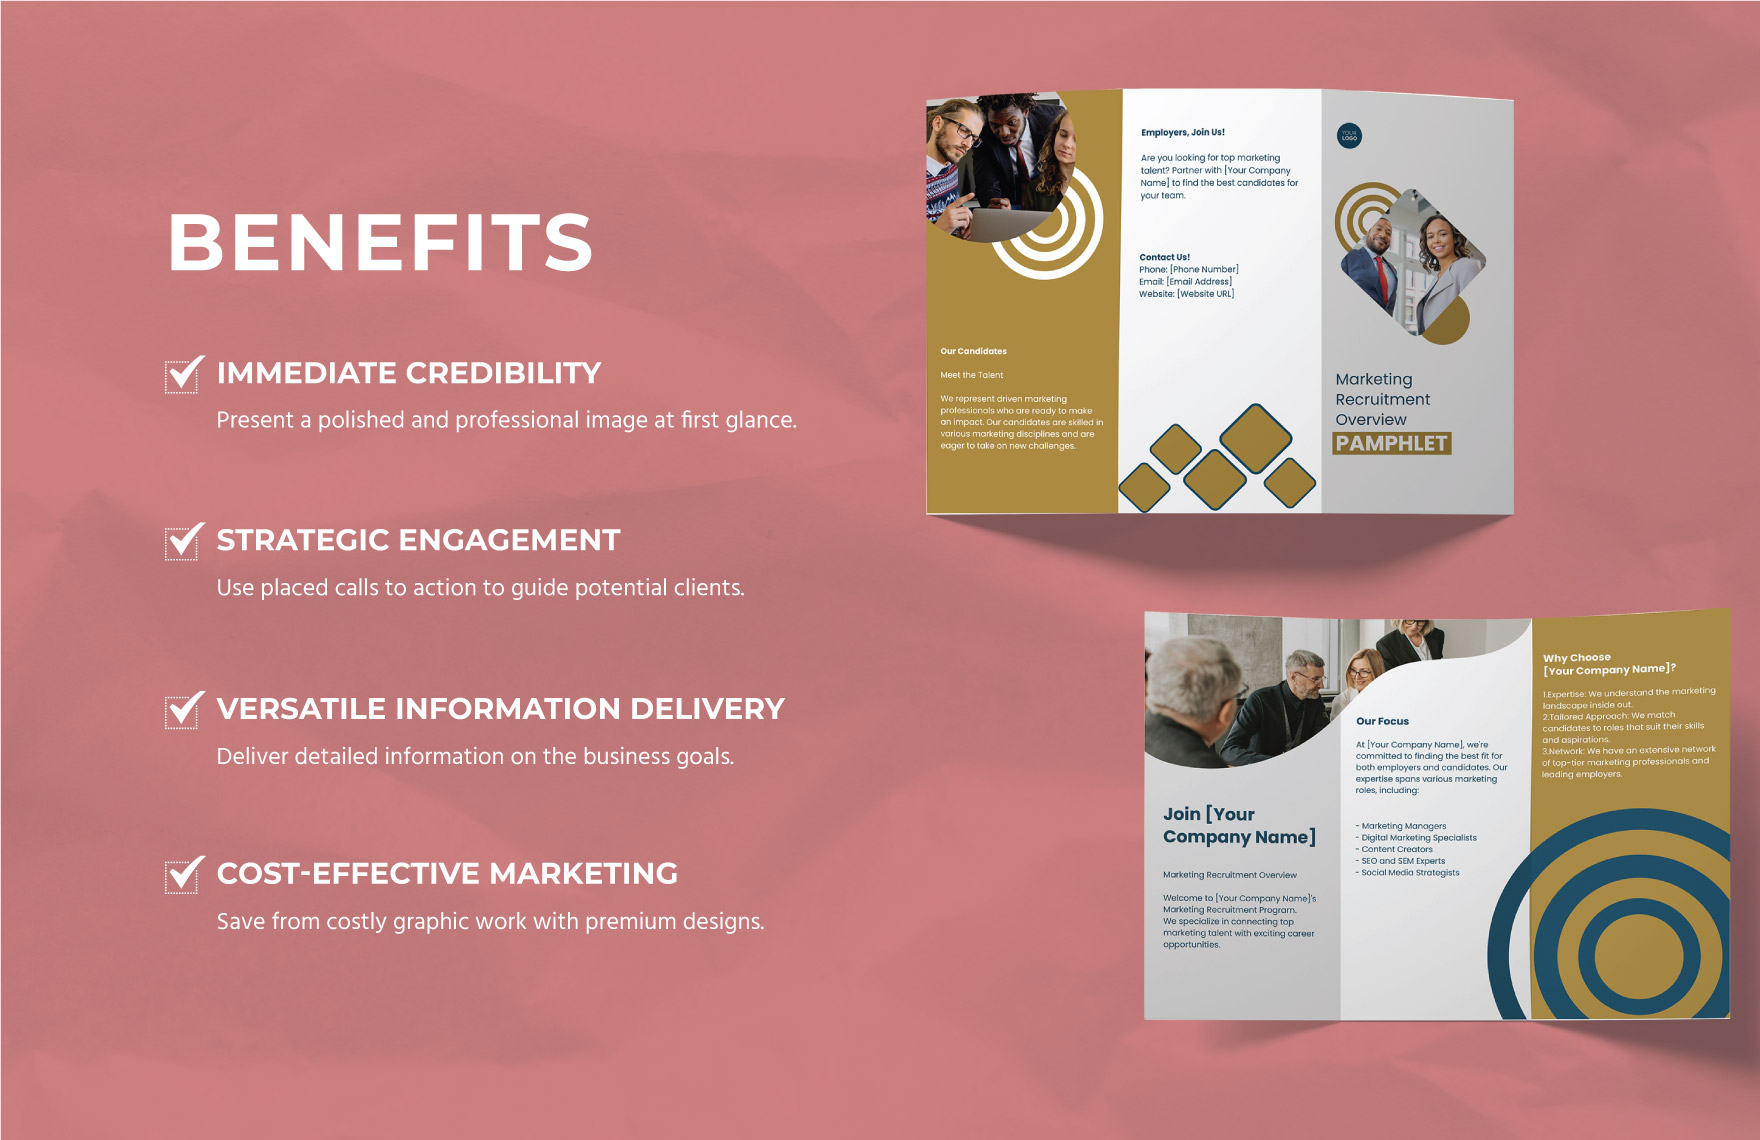 Marketing Recruitment Overview Pamphlet Template